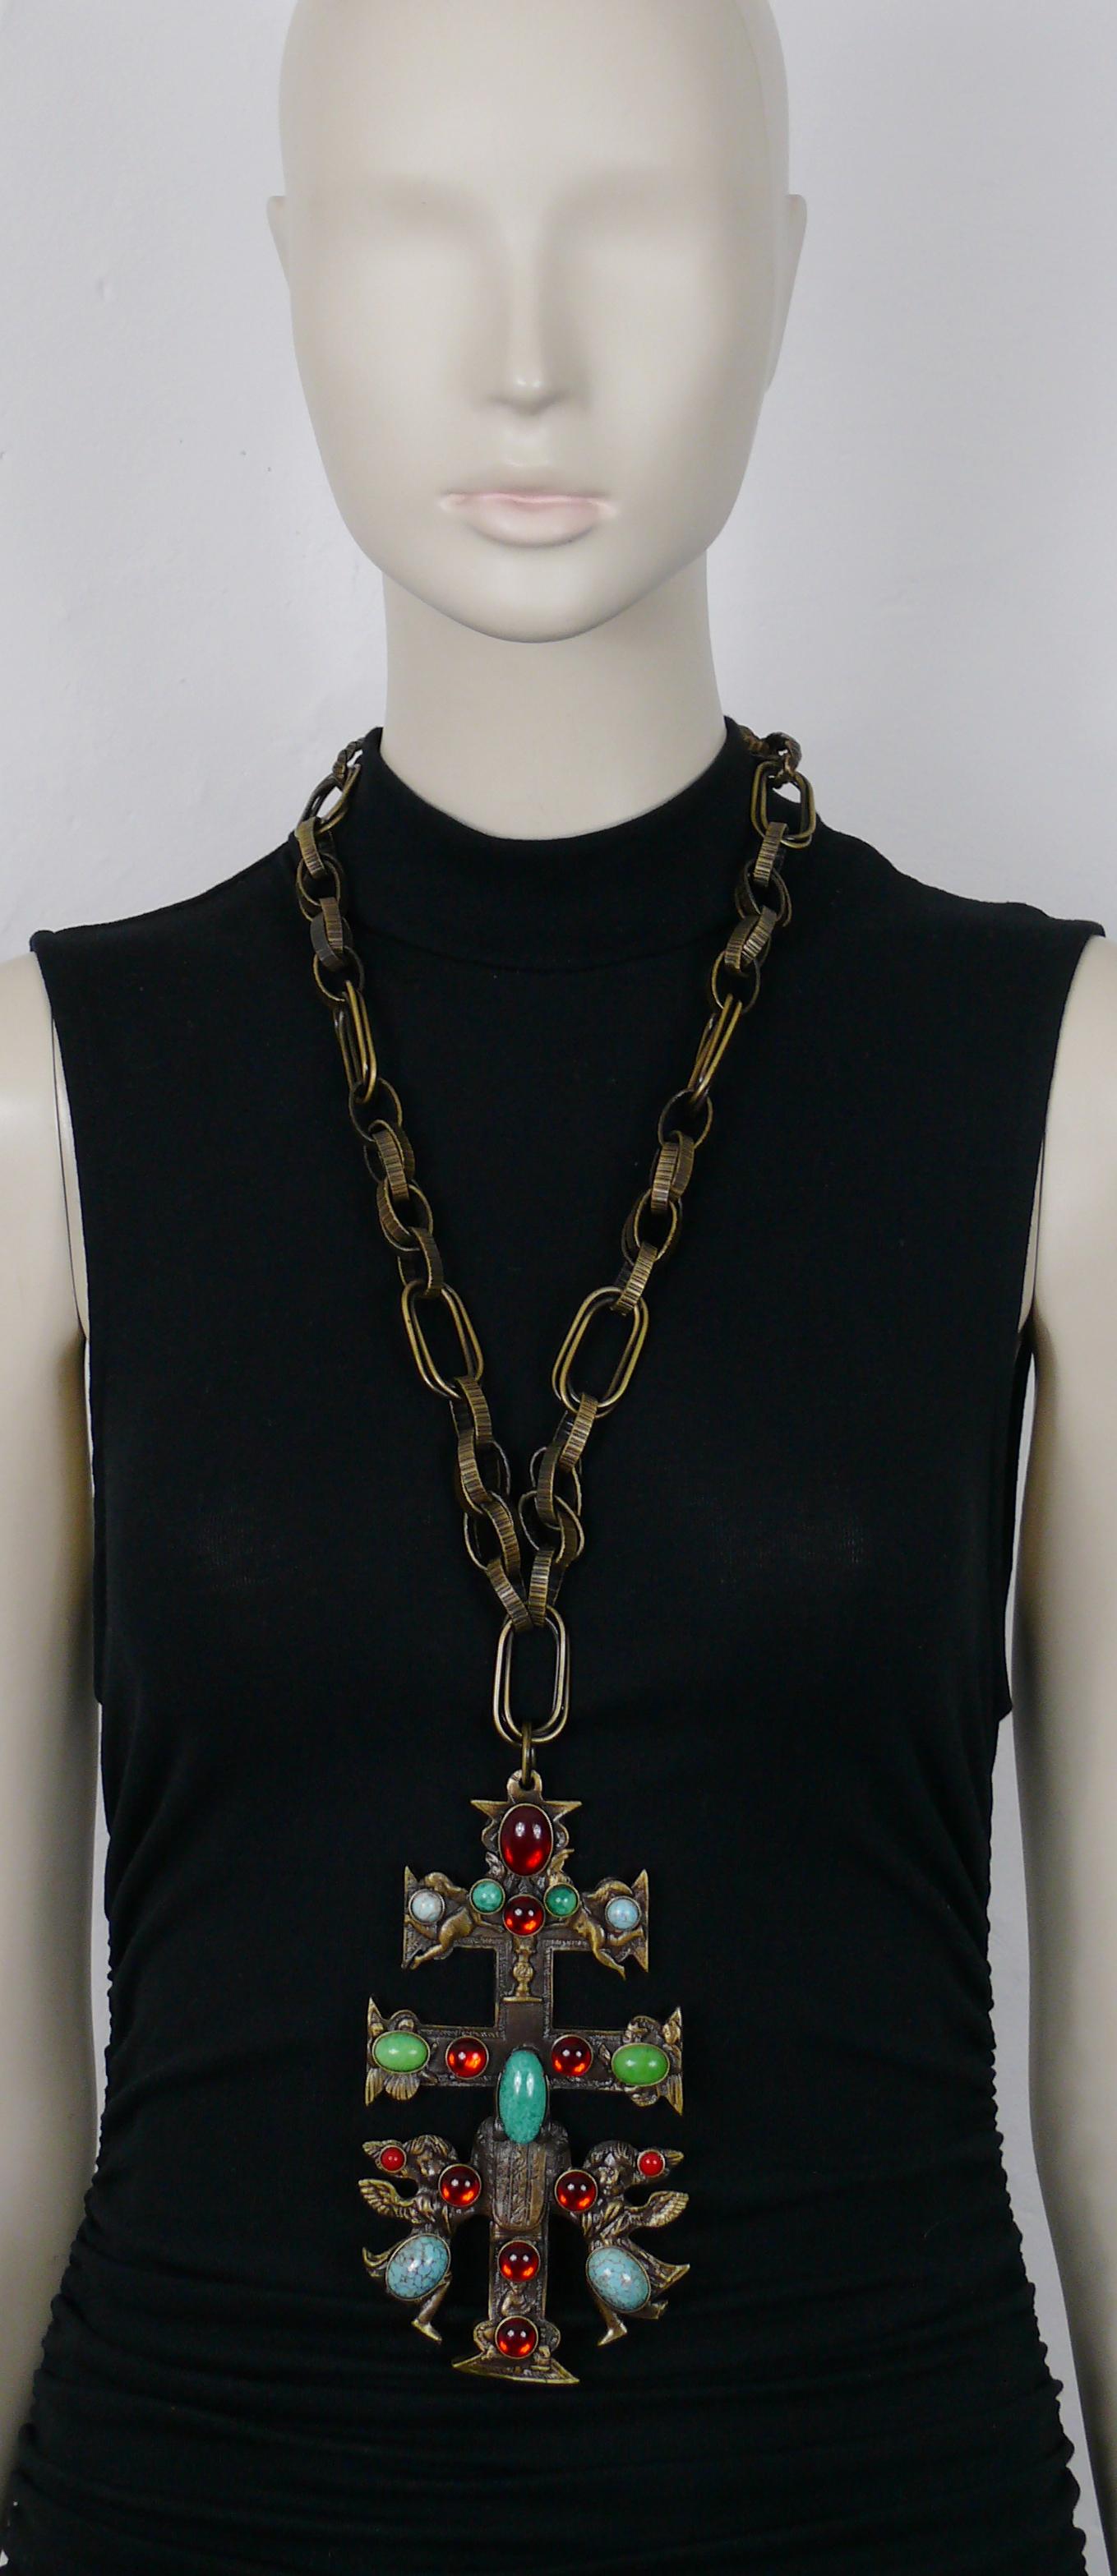 GIANFRANCO FERRE vintage bronze tone chunky chain necklace featuring a massive Caravaca cross pendant embellished with angels and multicolored glass cabochons.

Hook clasp closure.

Embossed FERRE Made in Italy.

Indicative measurements : adjustable